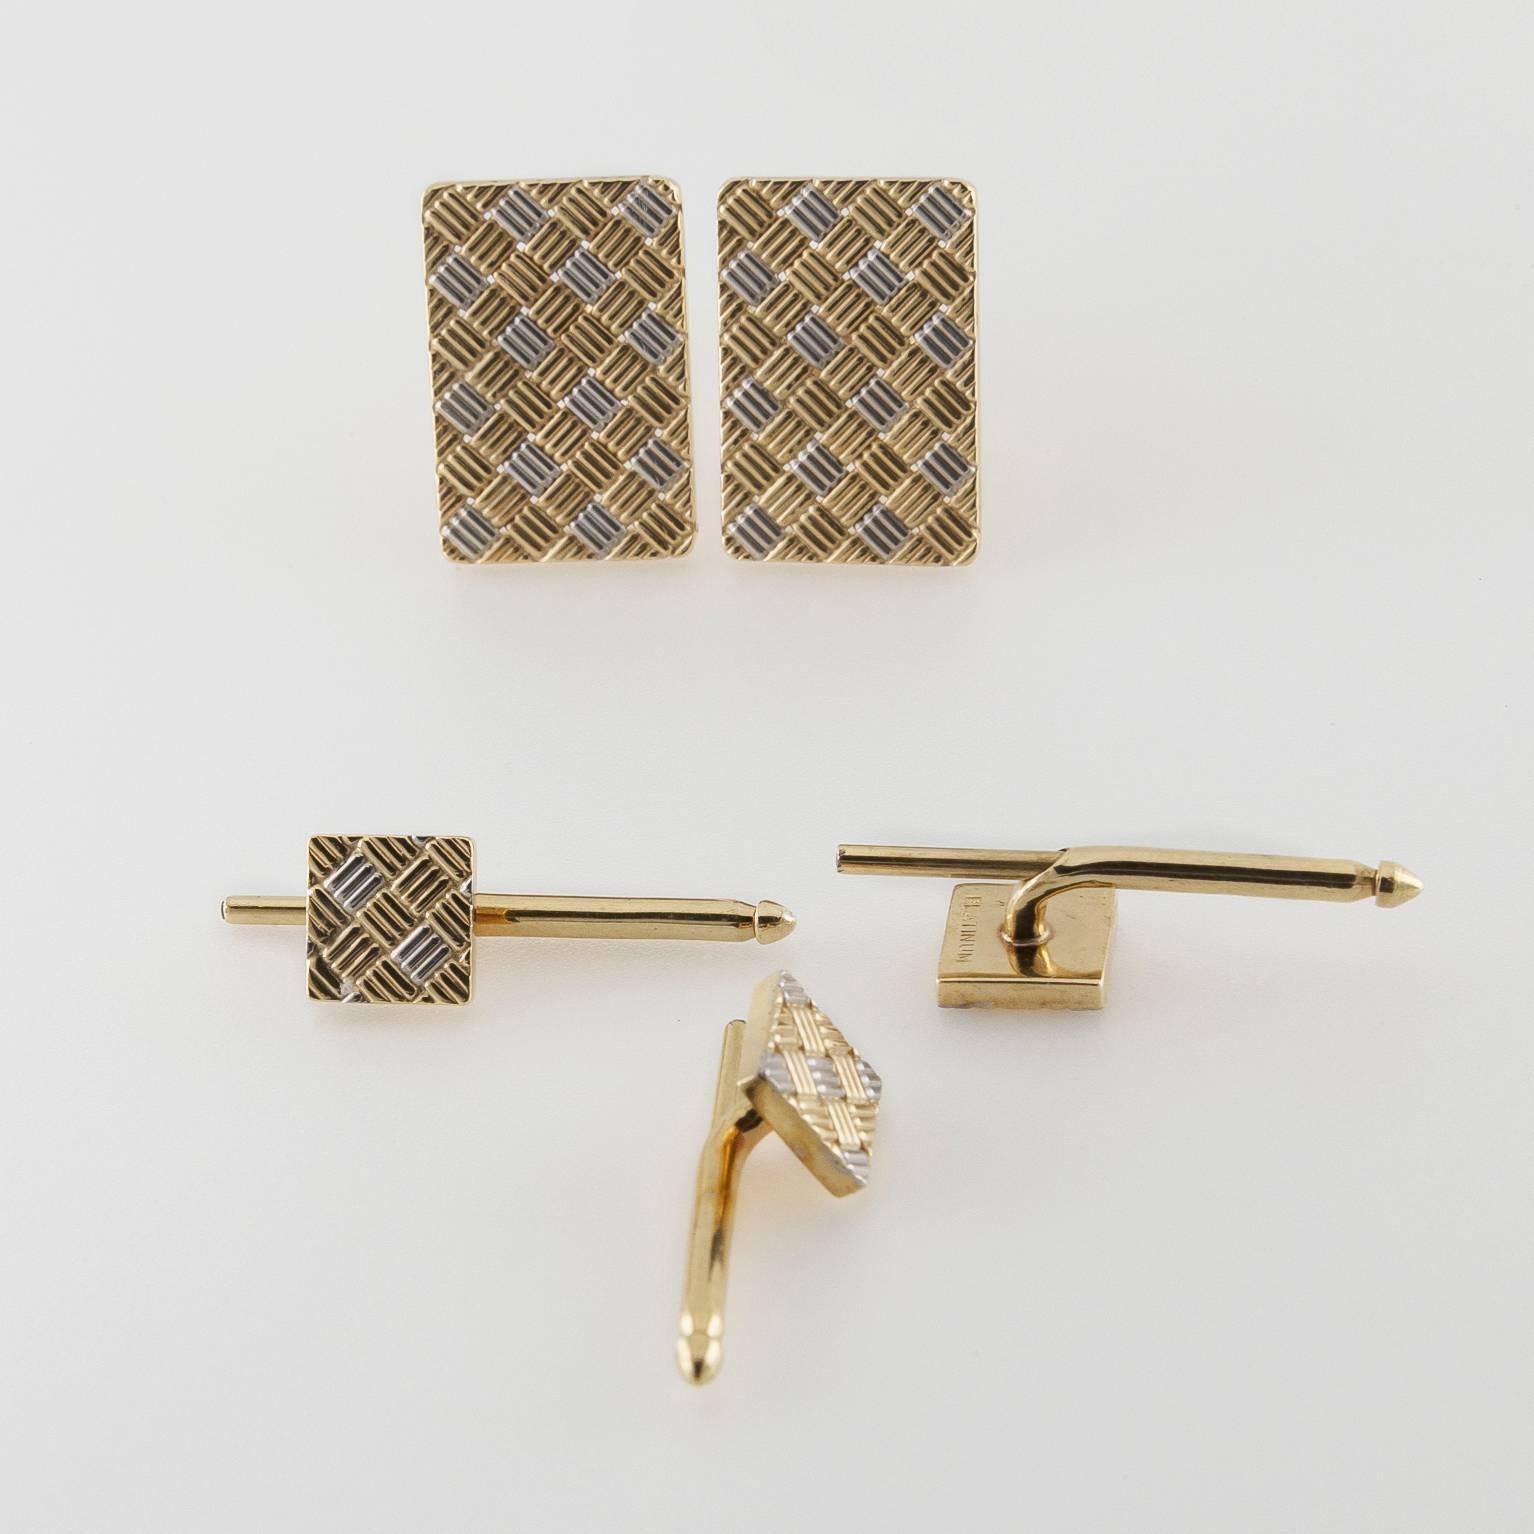 Modern Tuxedo Cufflinks Set in Gold and Platinum with Classic Woven Checkered Pattern